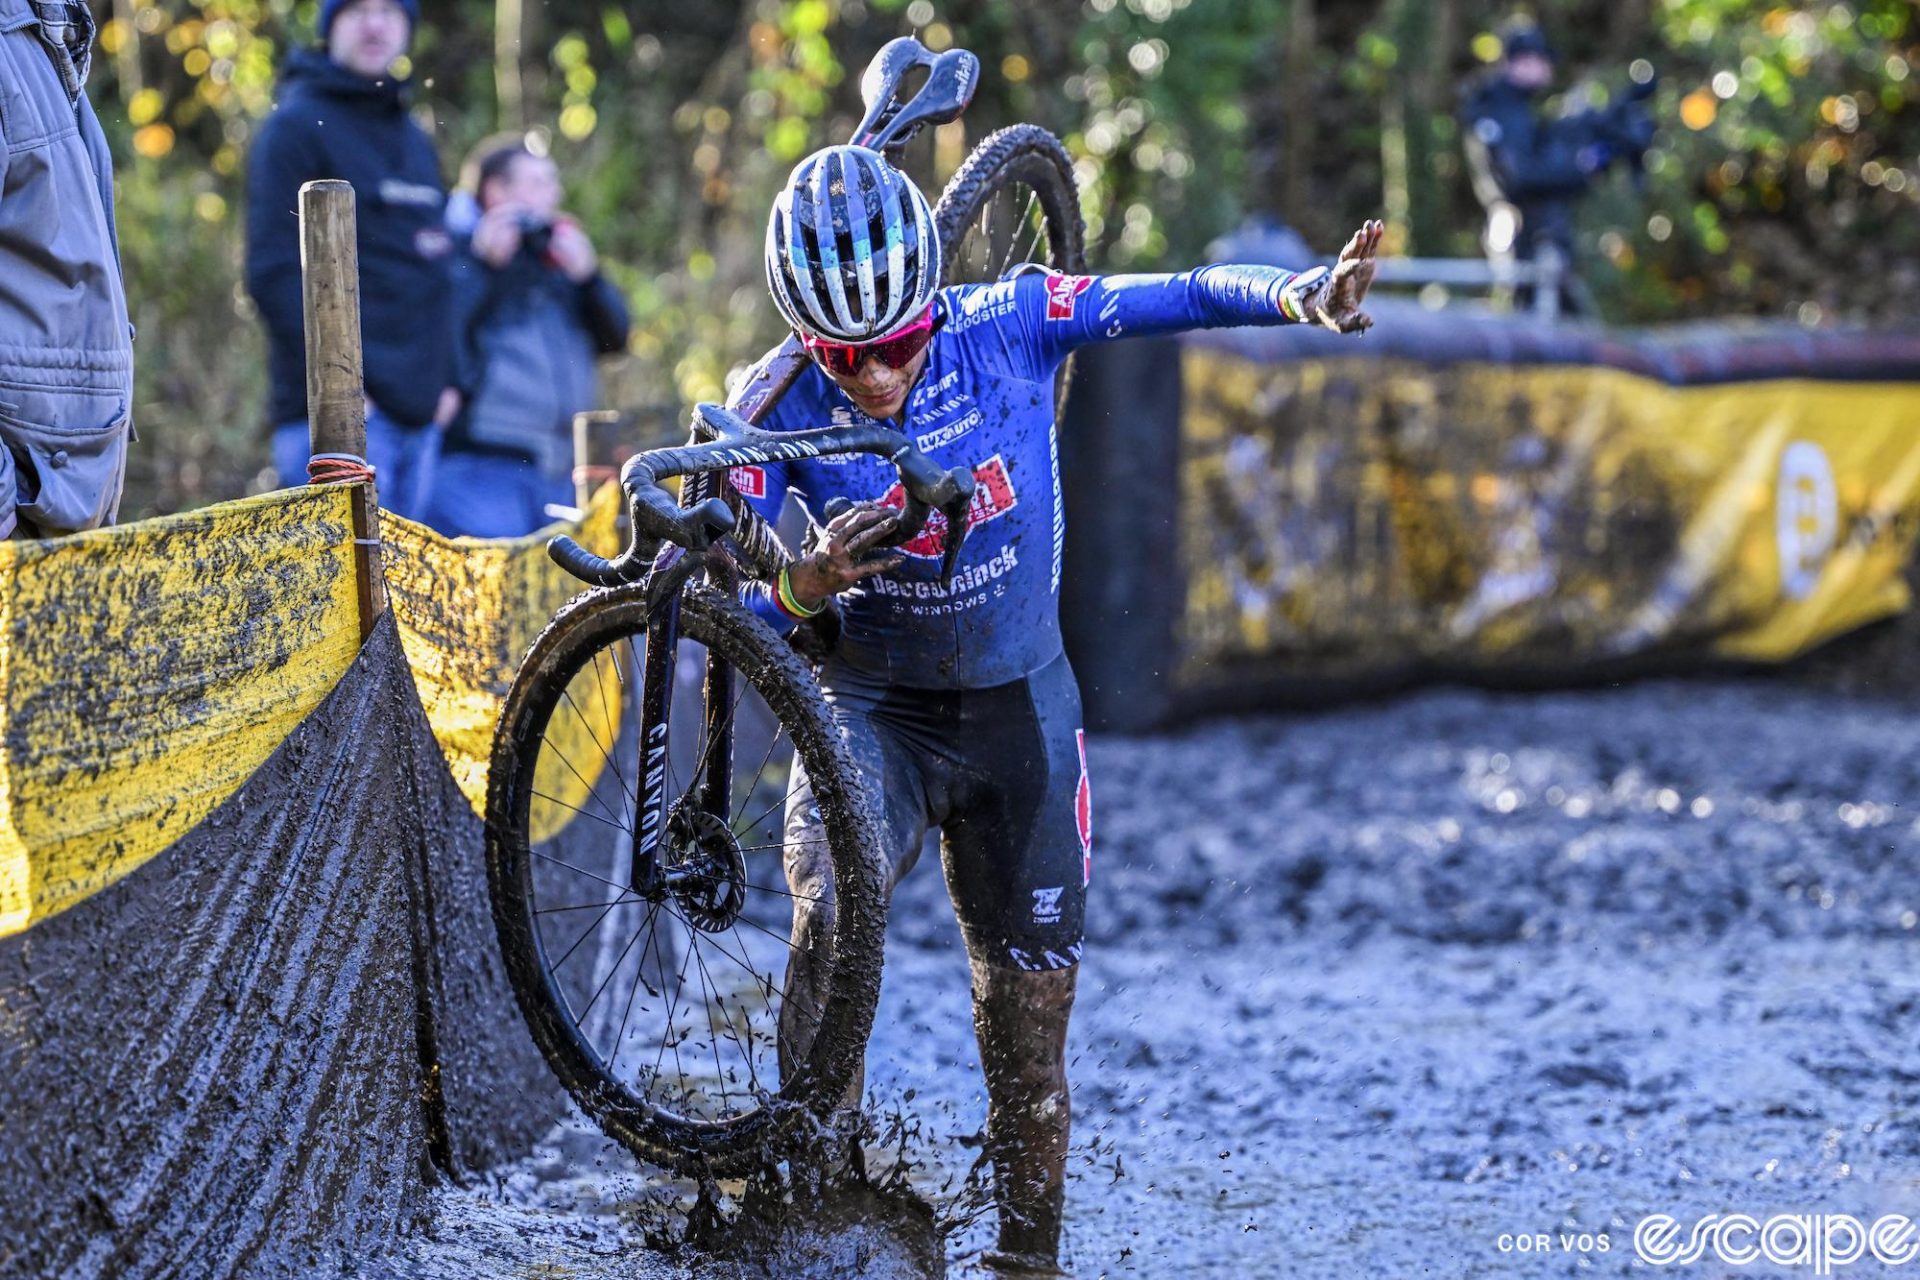 Ceylin del Carmen Alvarado fights for balance while running at the Superprestige Niel. She is looking down and her left arm is out to the side to keep from falling.